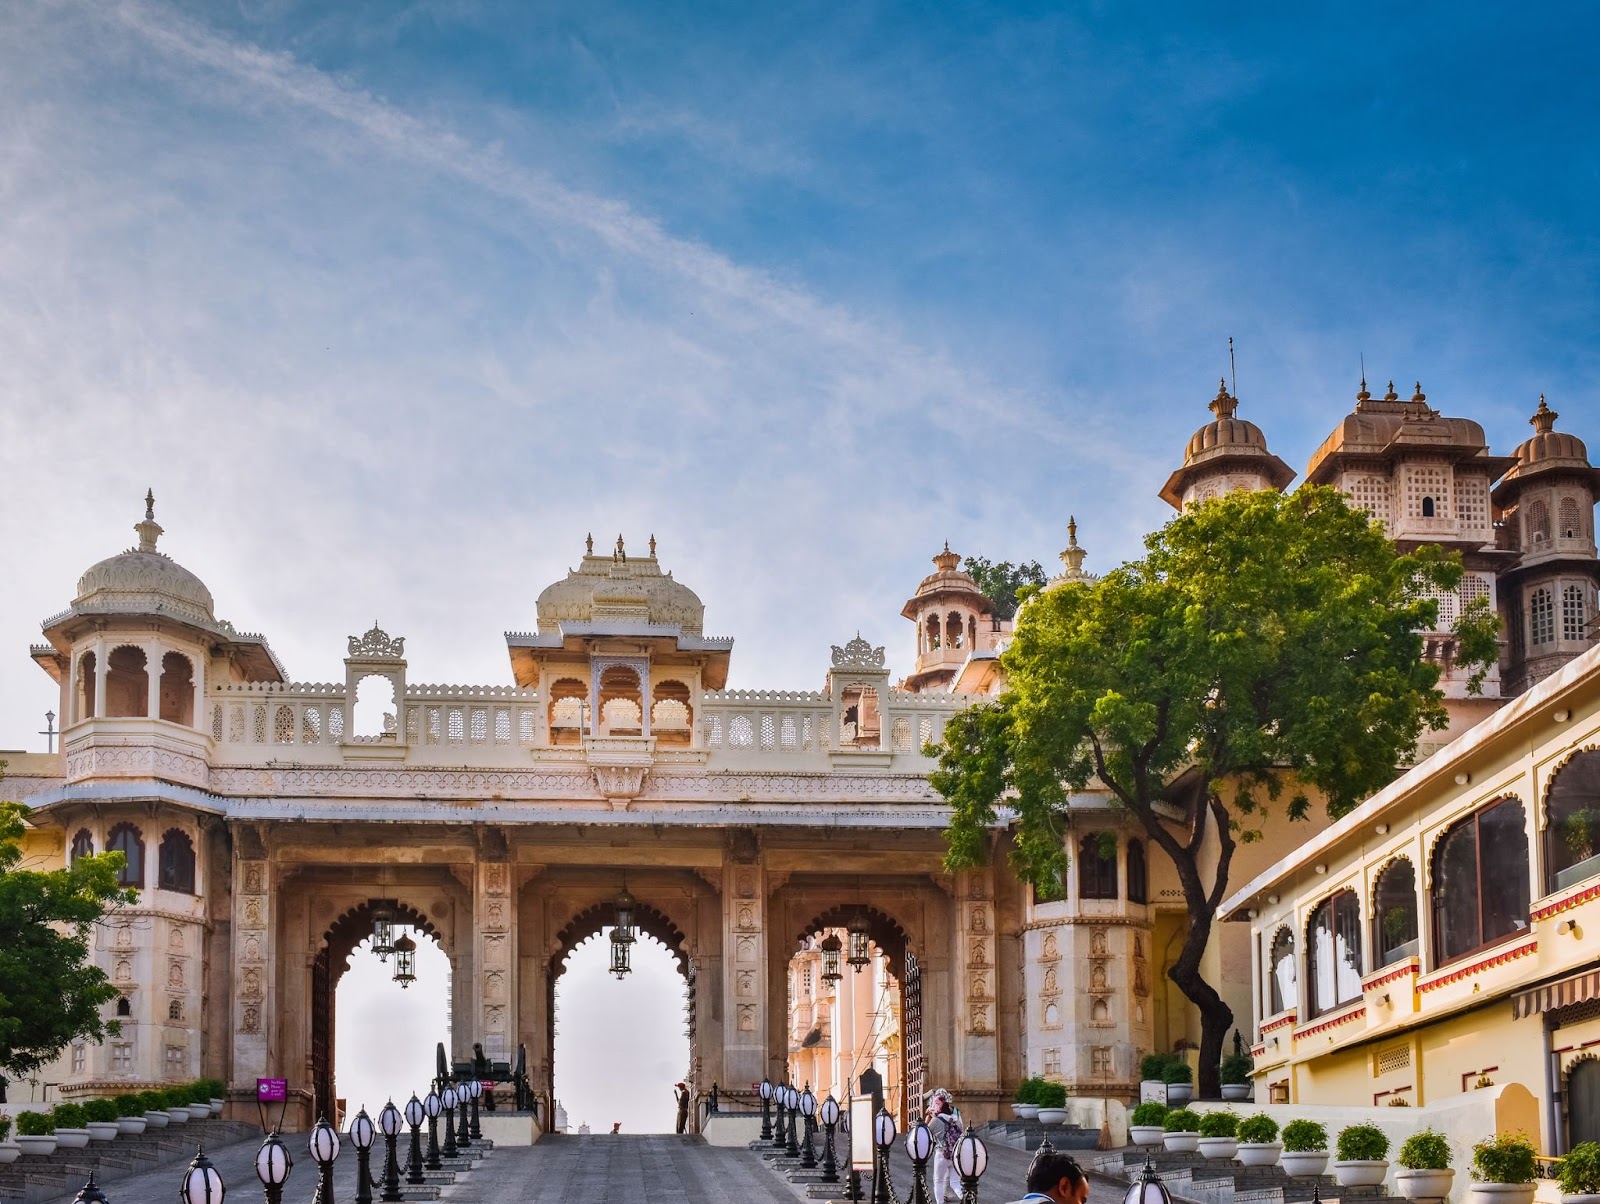 Tripolia Gate, City Palace, triple-arched gate, northern entry to City Palace, Udaipur, Rajasthan